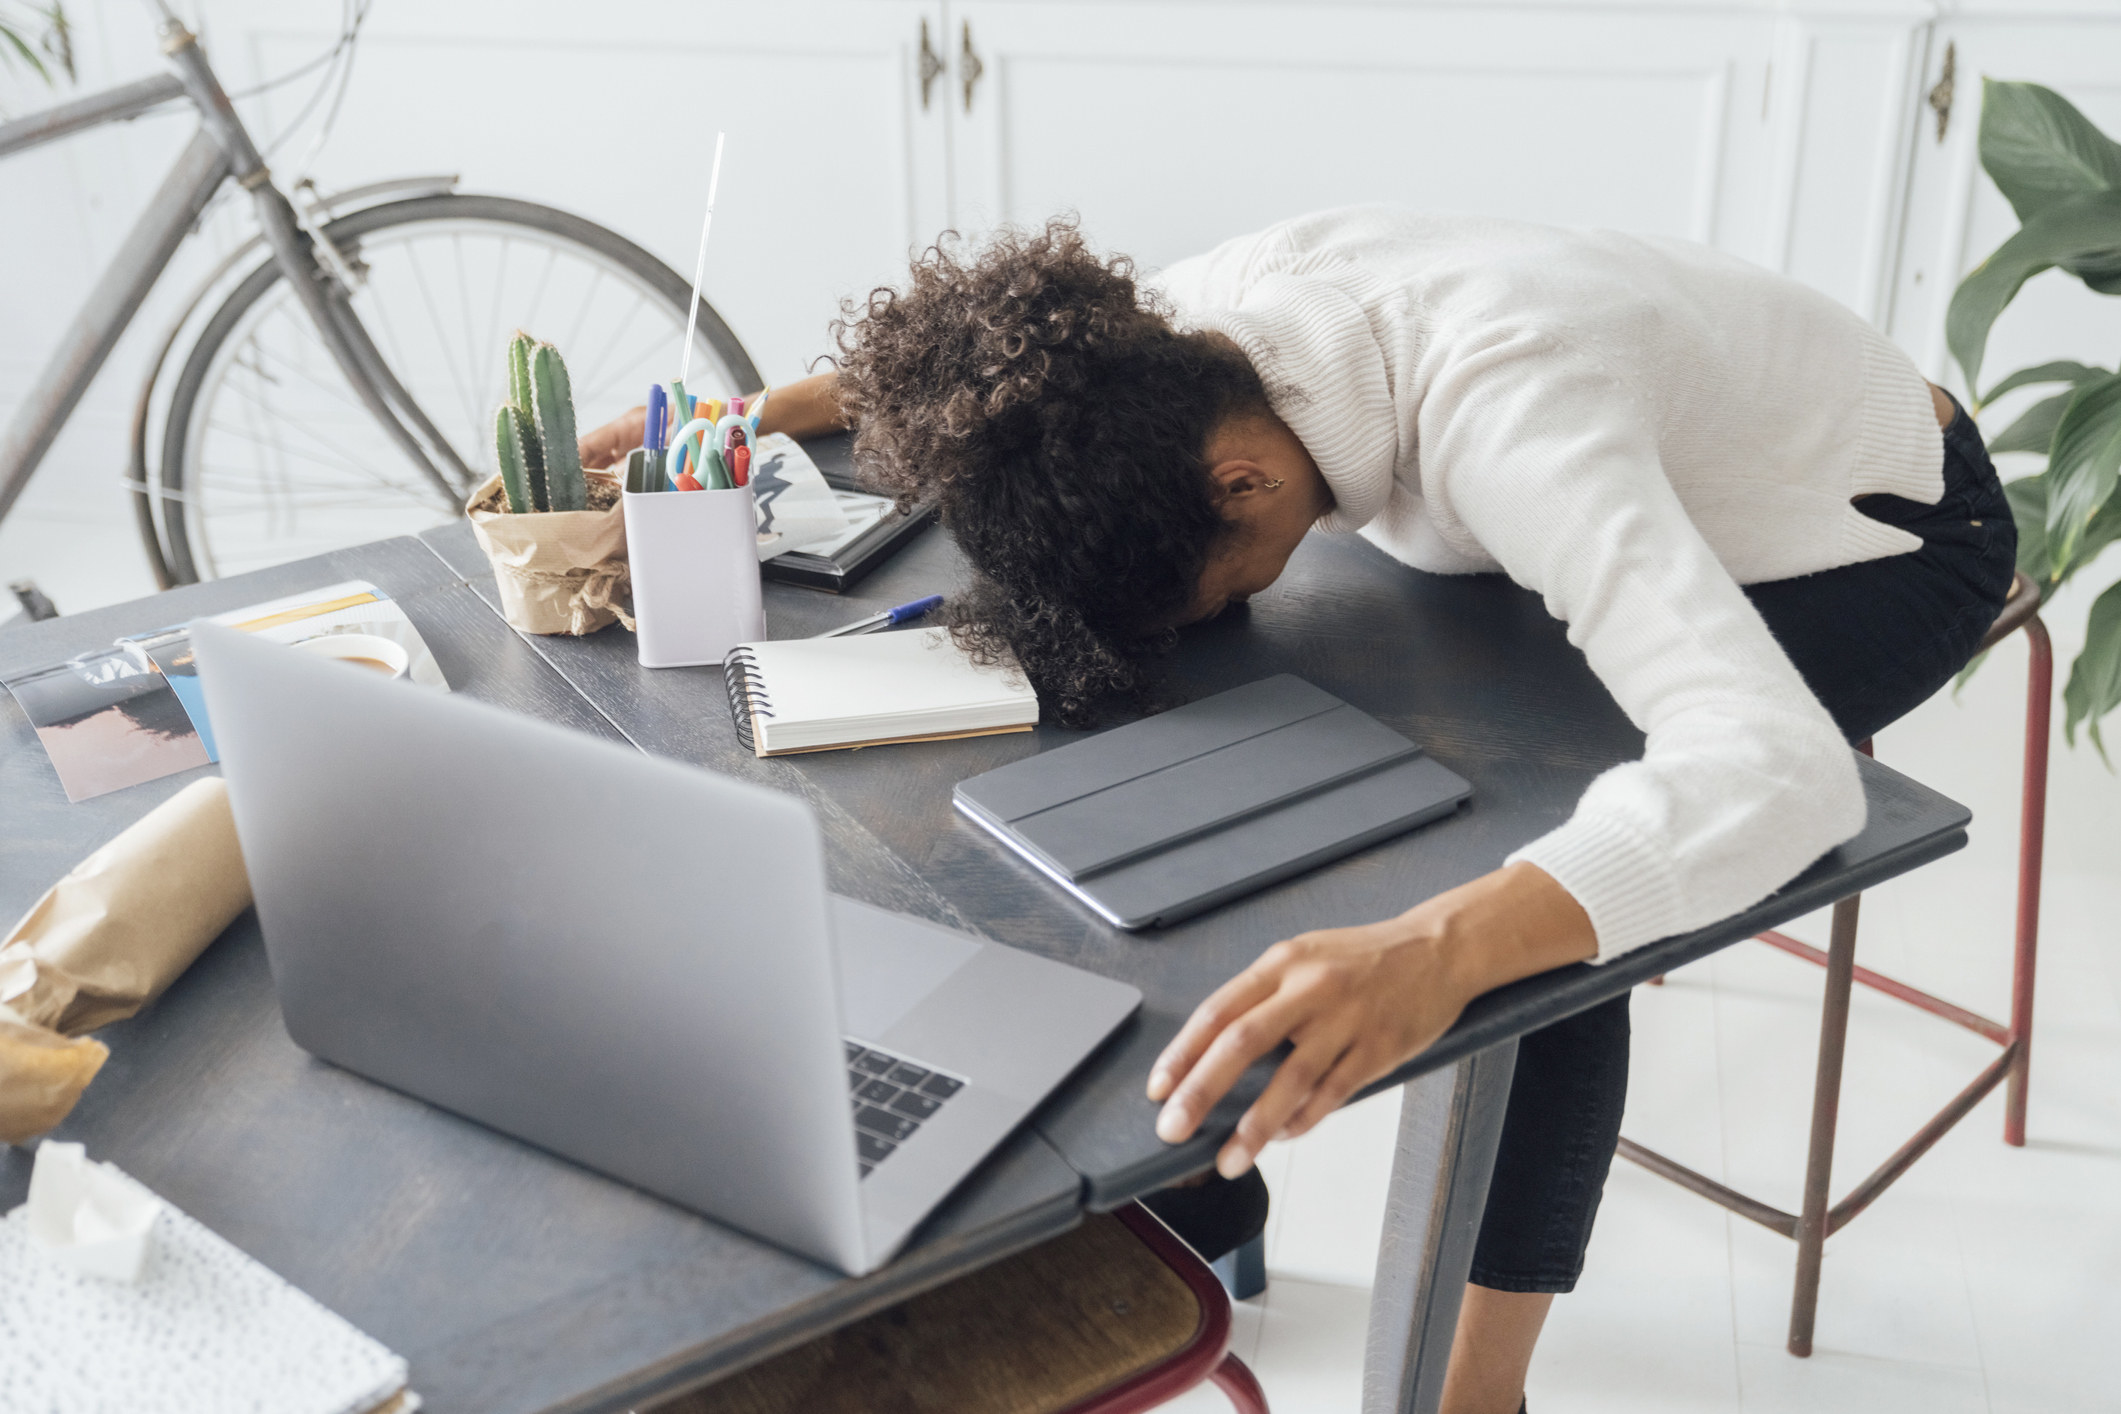 A tired worker putting her head down at her desk